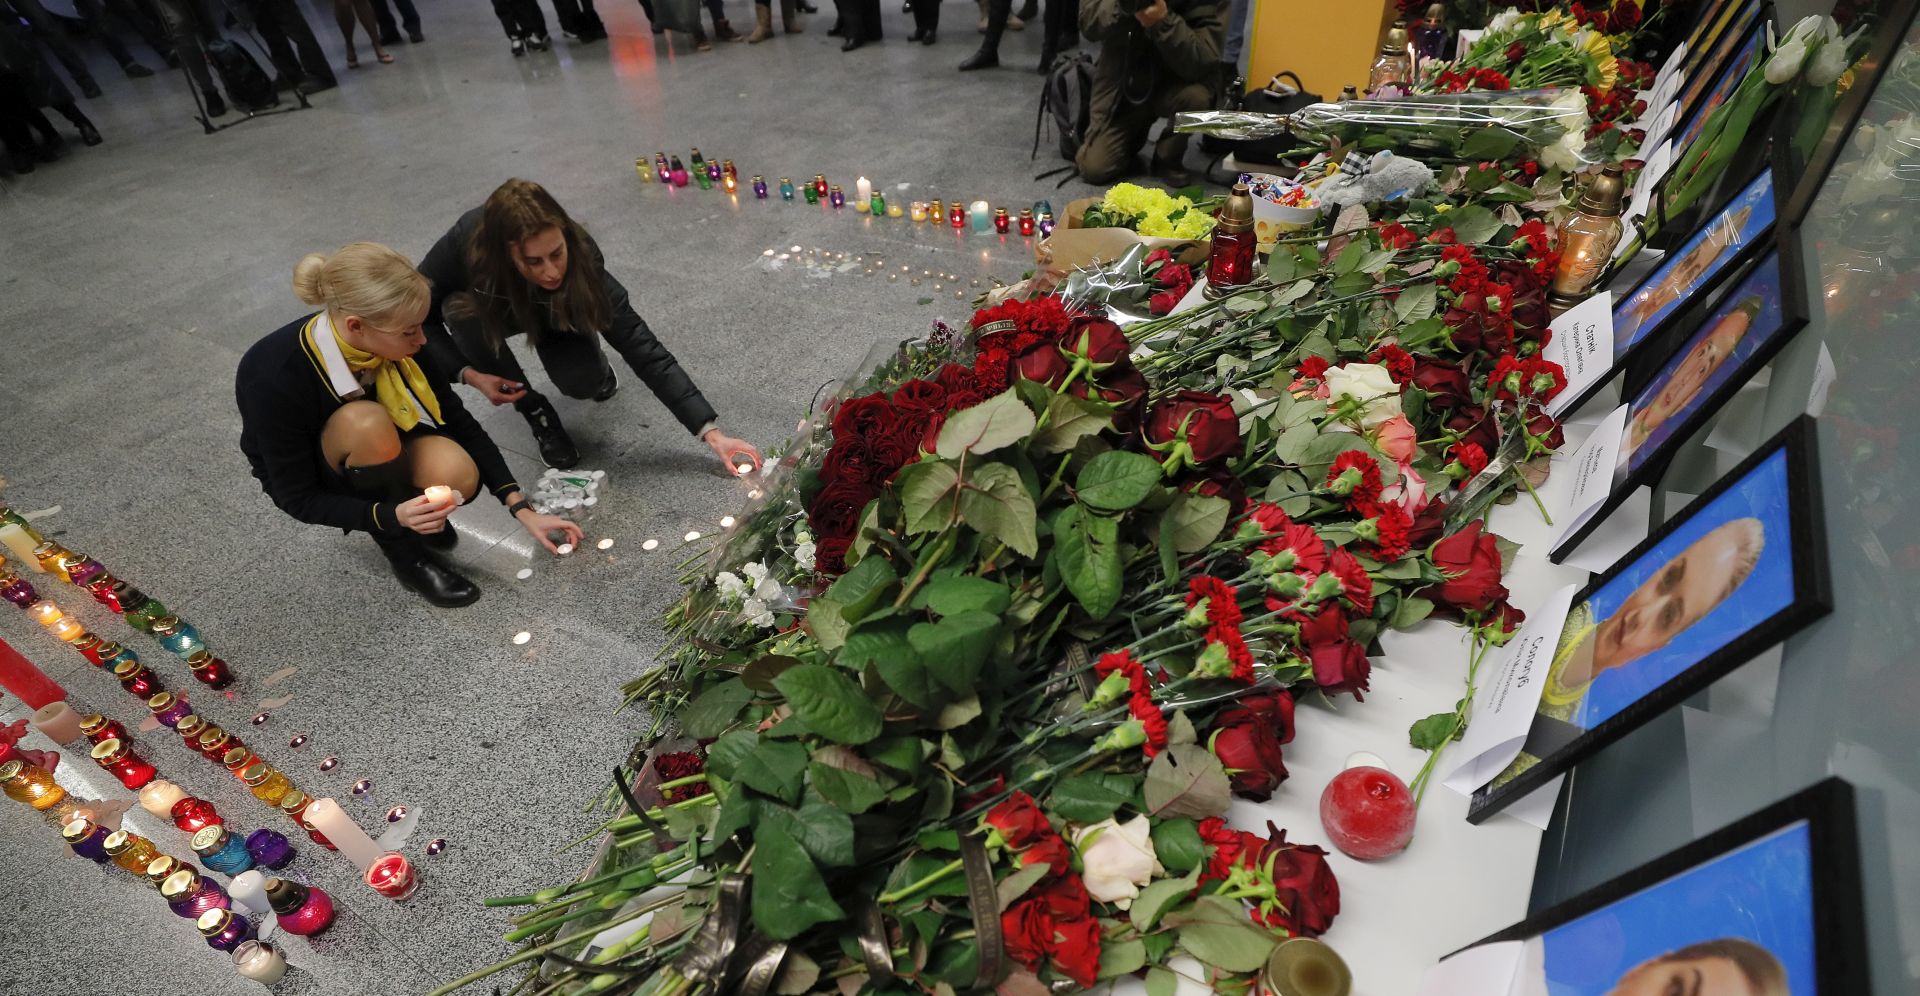 epa08113085 Relatives, colleagues, and friends of crew members of the Ukraine International Airlines Flight PS752 which crashed near Tehran light candles at Boryspil International Airport in Kiev, Ukraine, 08 January 2020. According to media reports on 08 January 2020, a Ukraine International Airlines Boeing 737-800 plane crashed soon after takeoff near Imam Khomeini Airport in Tehran, Iran. Over 170 people were thought to be on the plane, and reports state that all passengers and crew were killed in the crash.  EPA/SERGEY DOLZHENKO